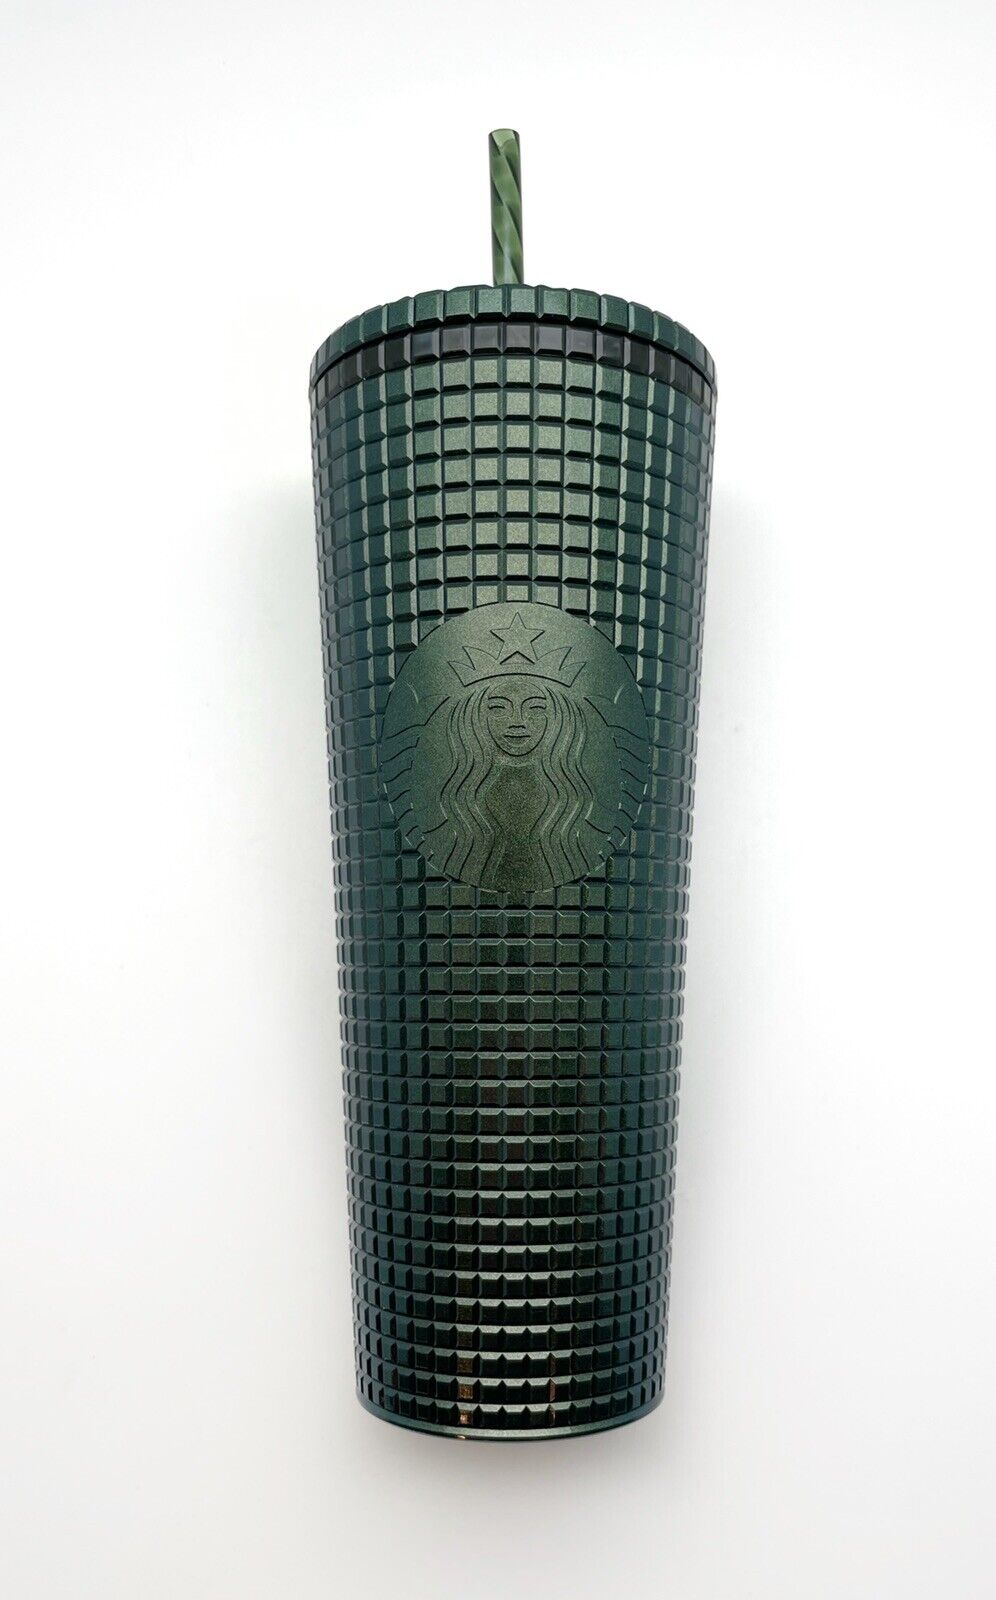 New Starbucks 2021 Winter Holiday Grid Tumbler Cold Cup 24oz, Green Christmas